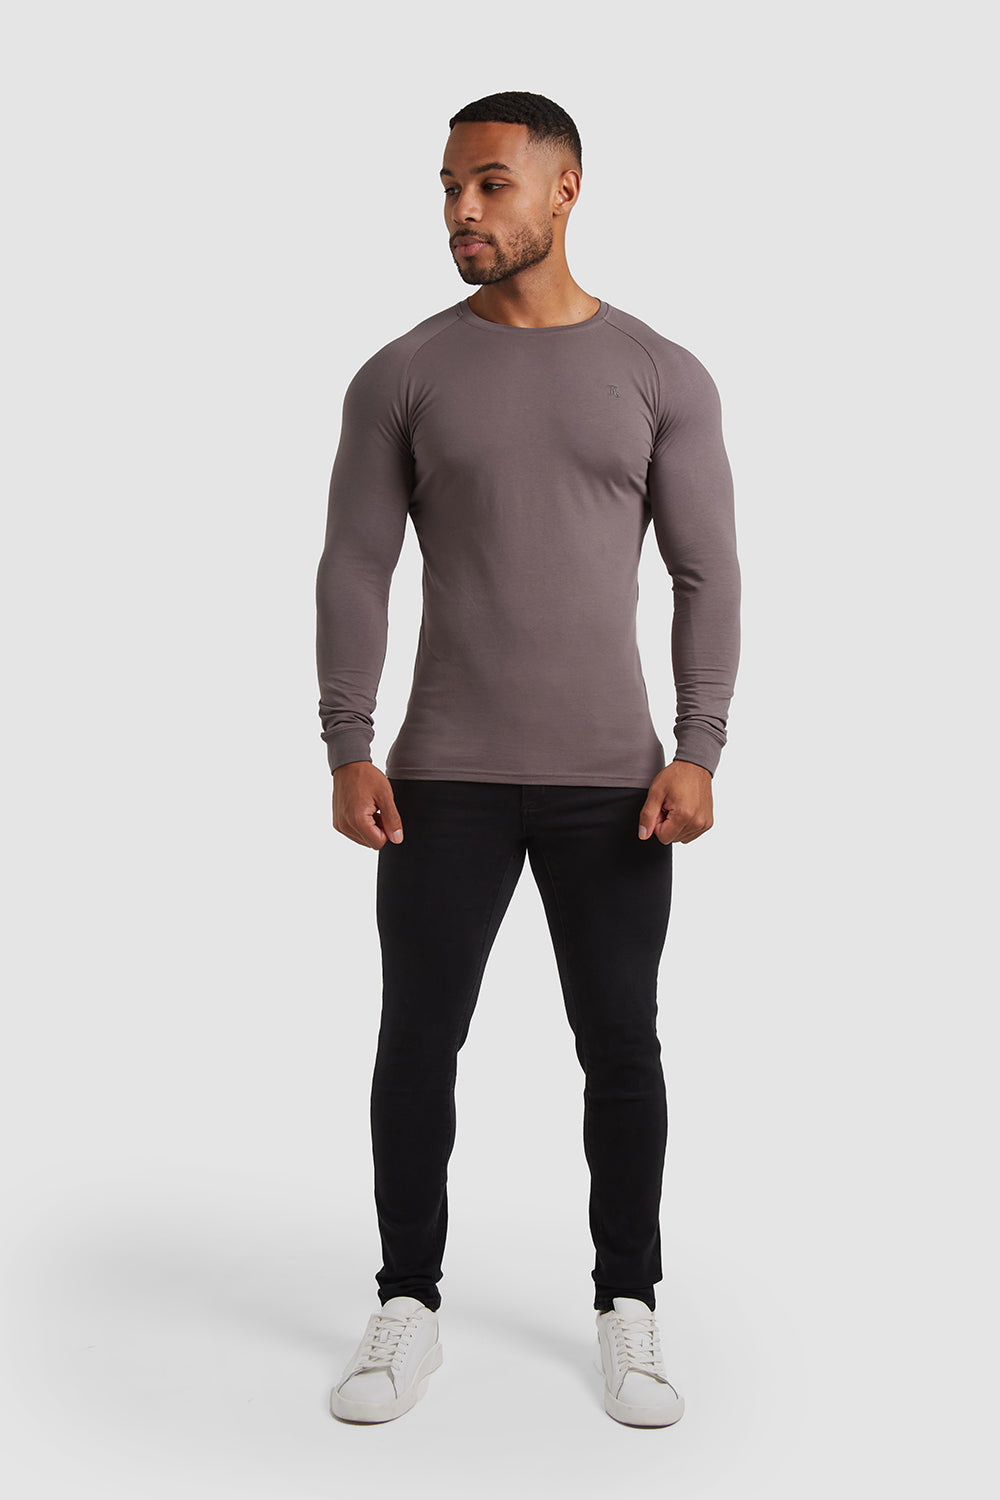 Muscle Fit T-Shirt (LS) in Mole - TAILORED ATHLETE - ROW